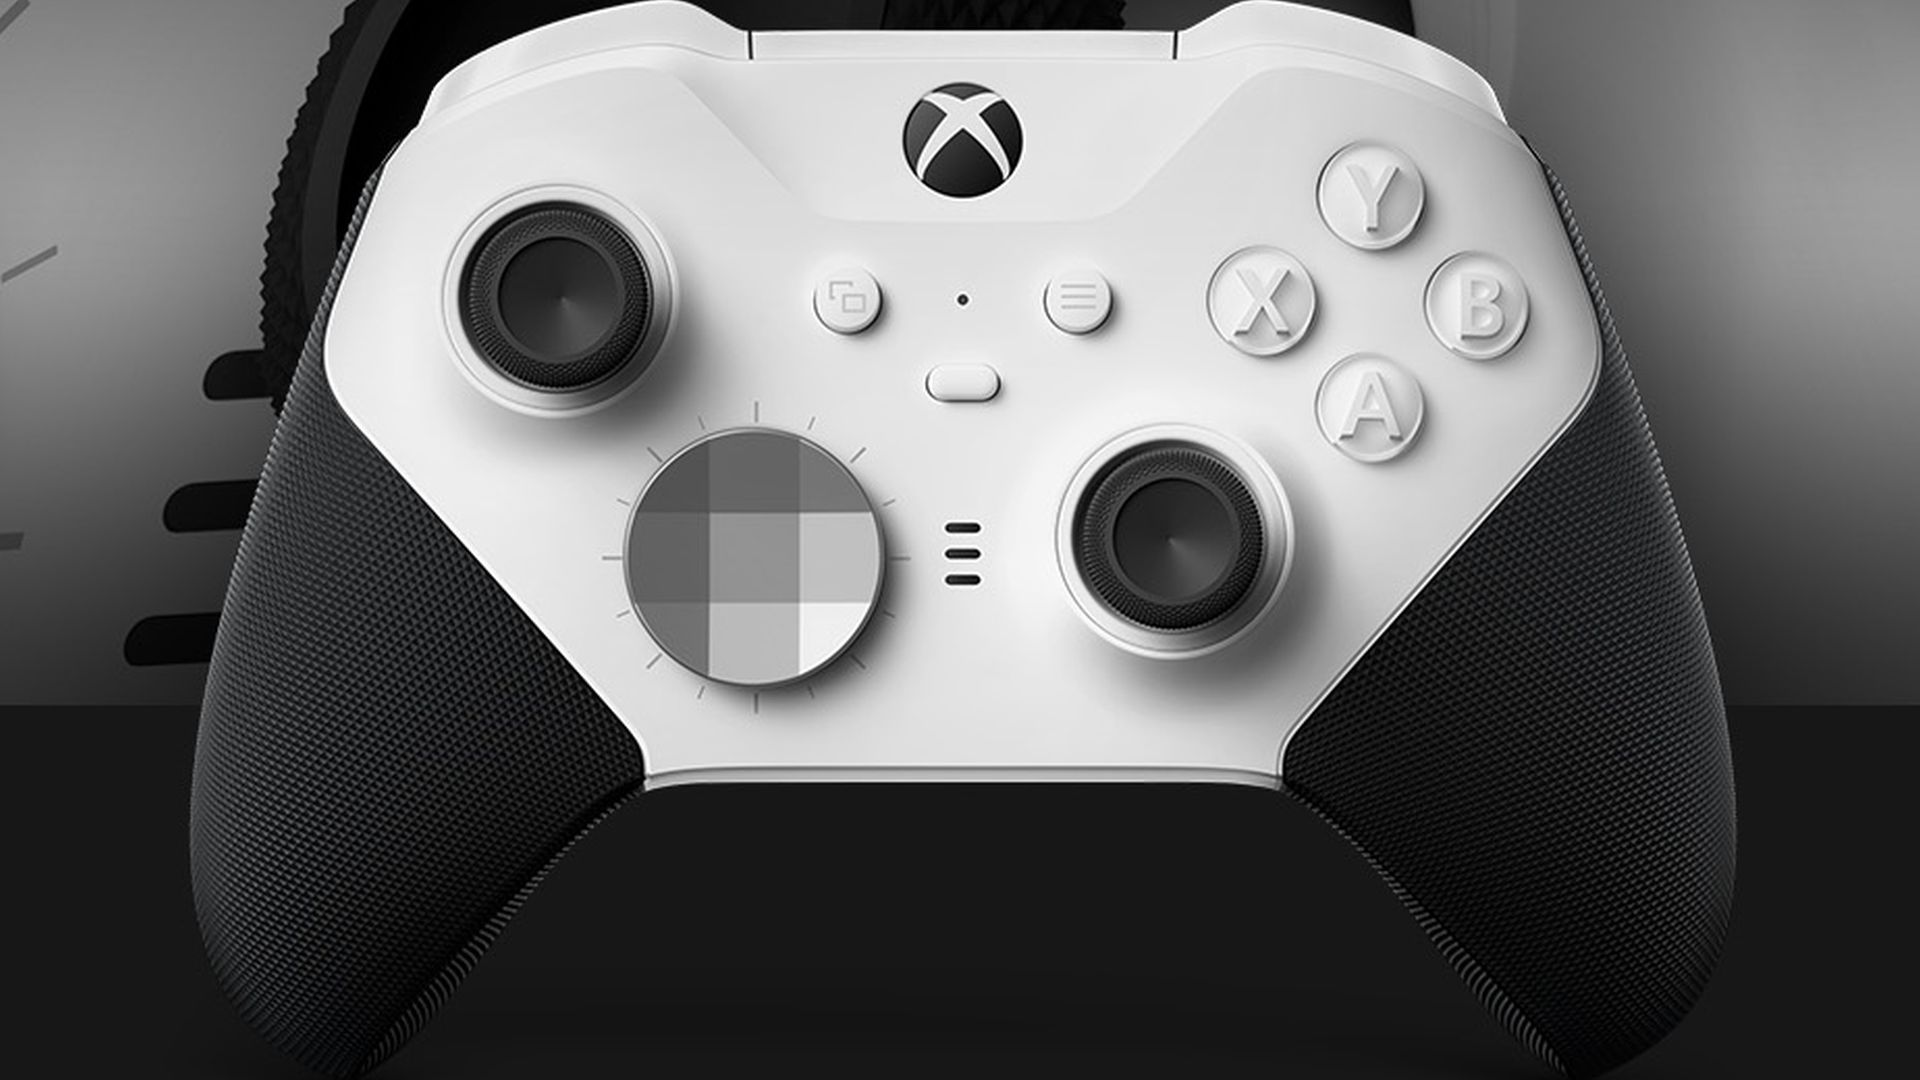 Xbox is Working on a New Controller with Haptic Feedback, as Per Leaked ...